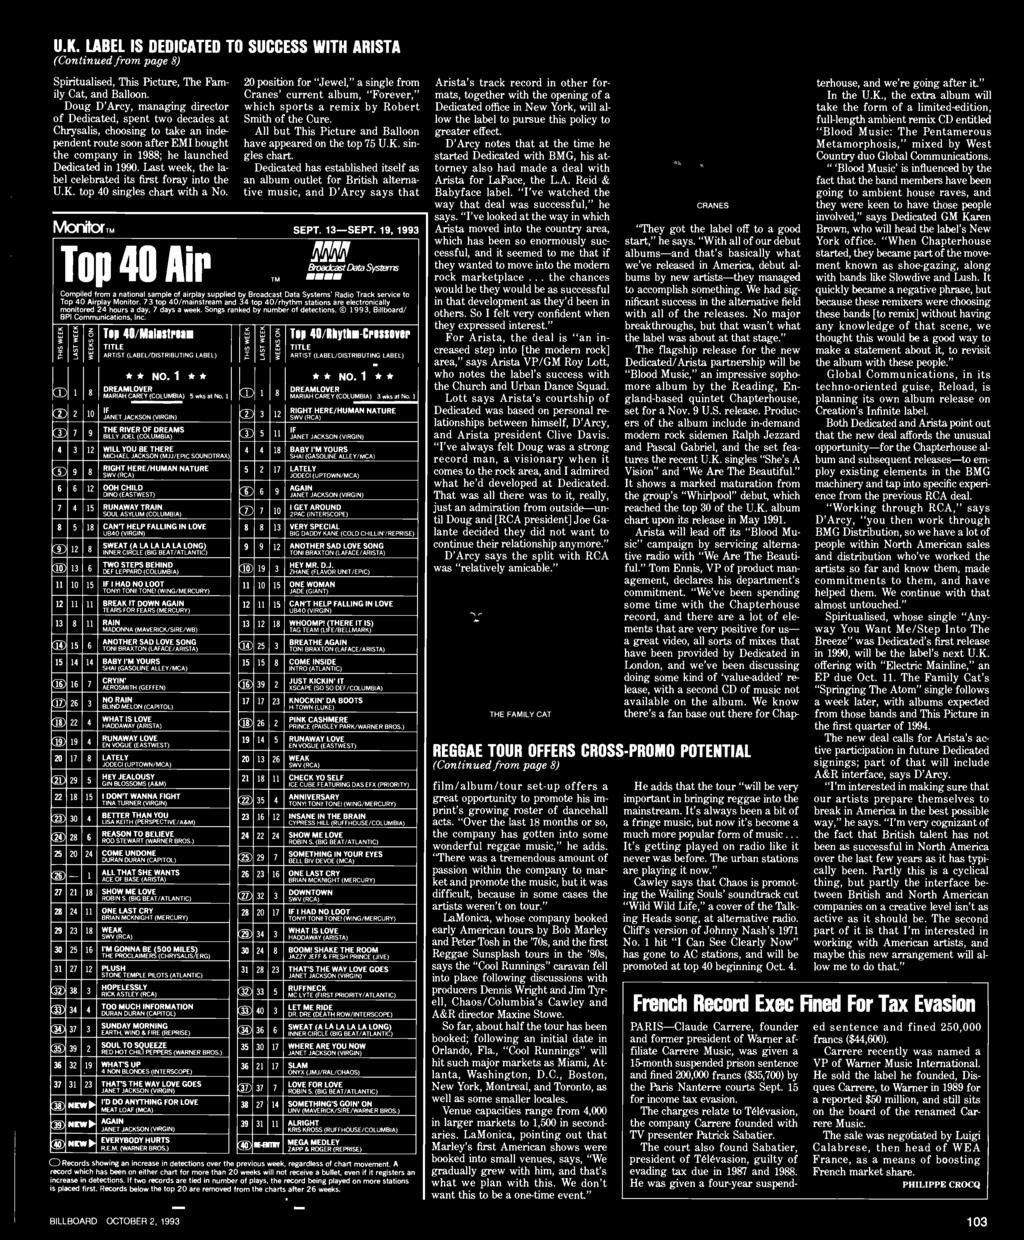 singles chart. Dedicated has established itself as an album outlet for British alternative music, and D'Arcy says that Monitor,. M \! TM SEPT. -SEPT. 9, 99 Top 40 Airplay.